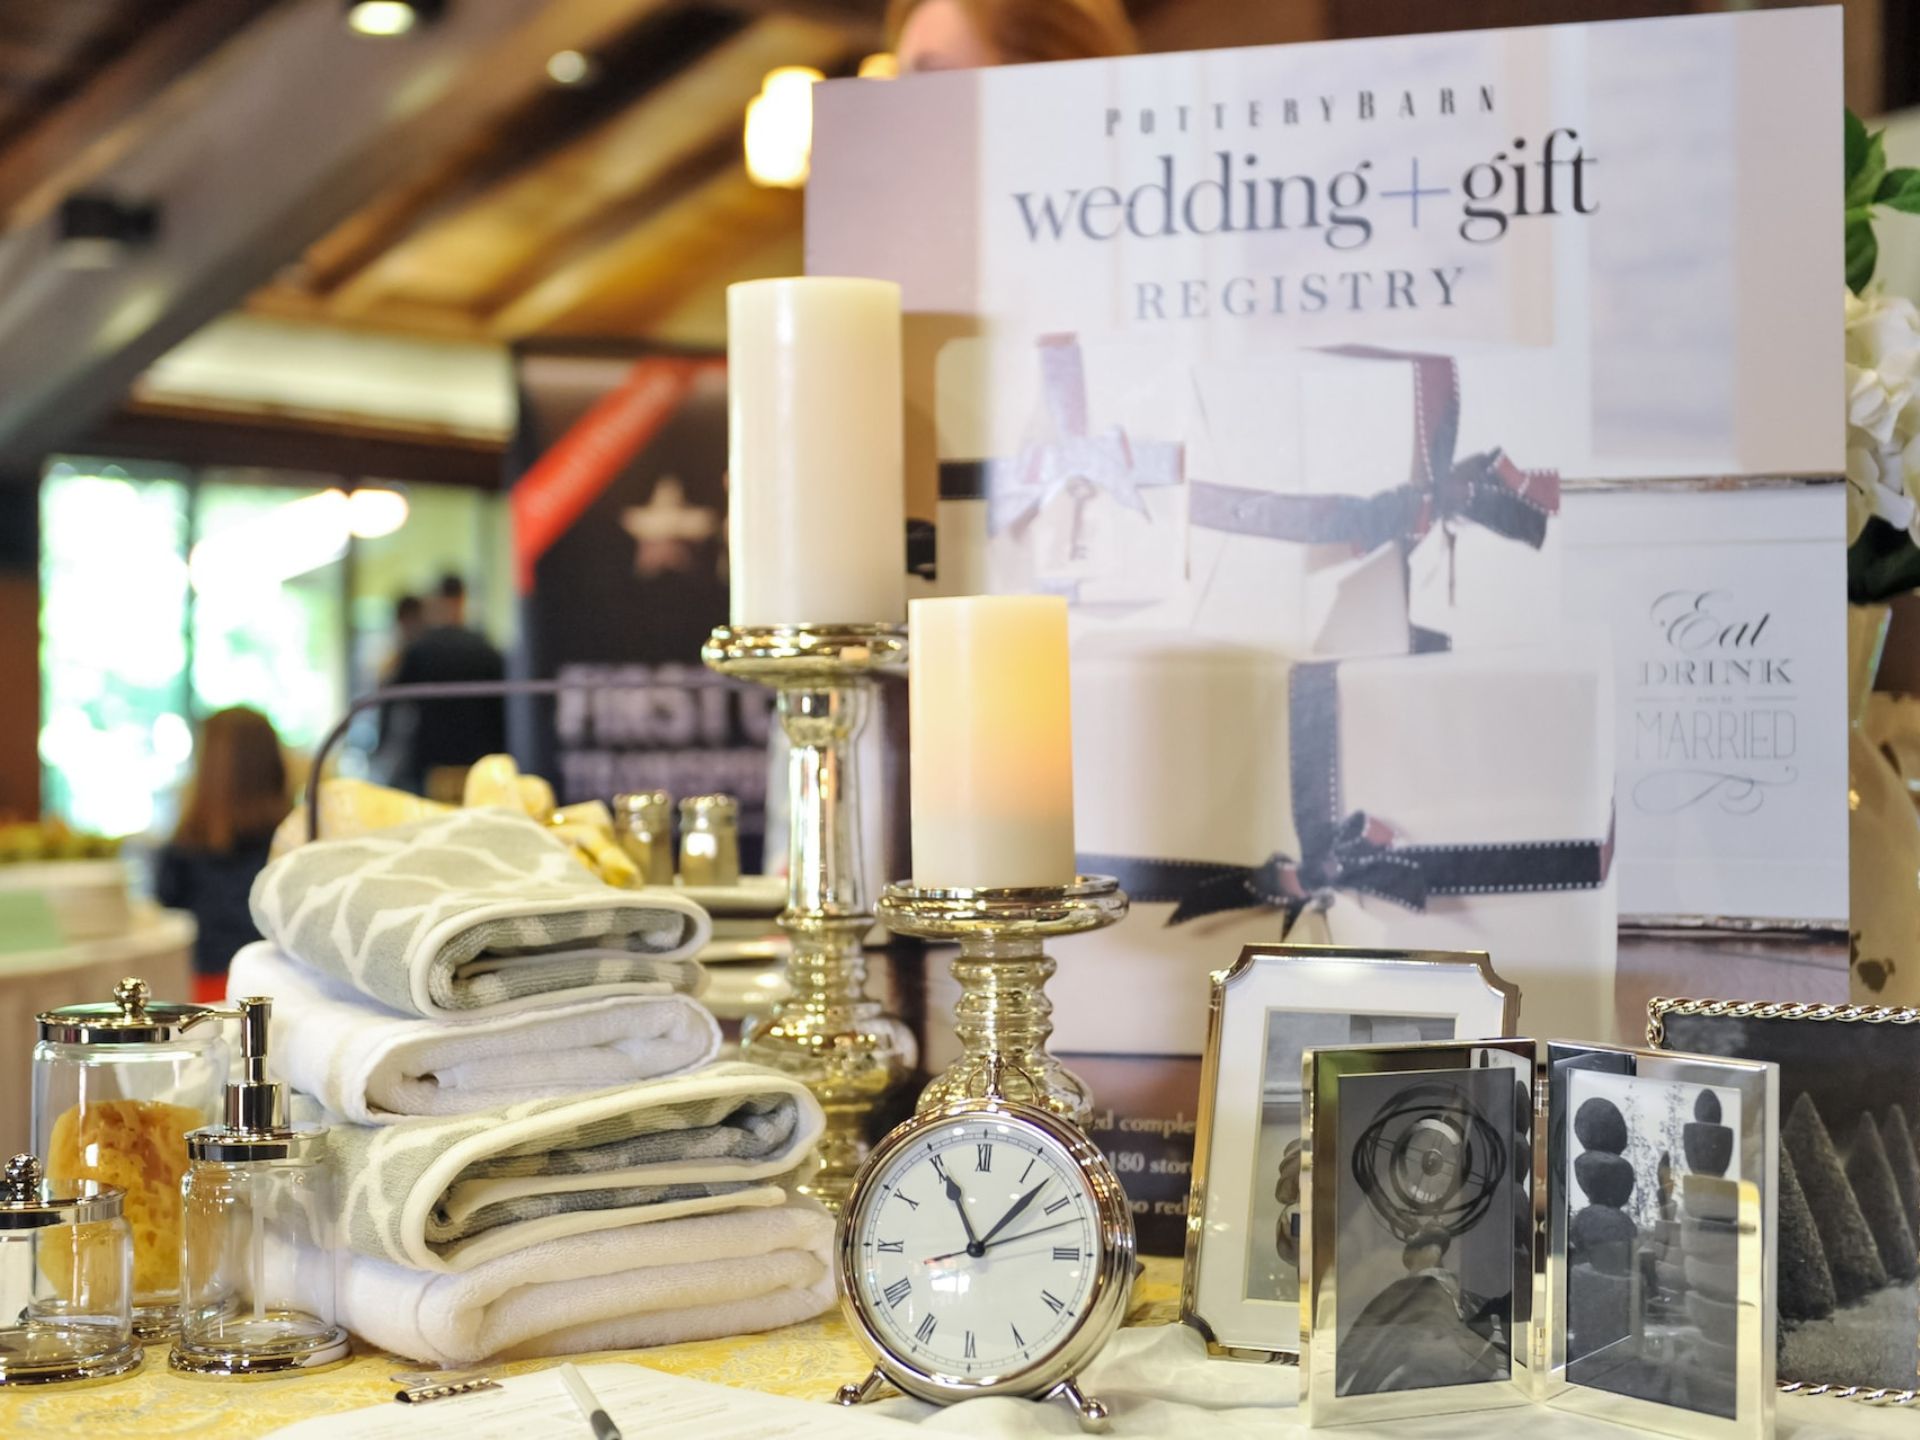 A table filled with wedding gifts.